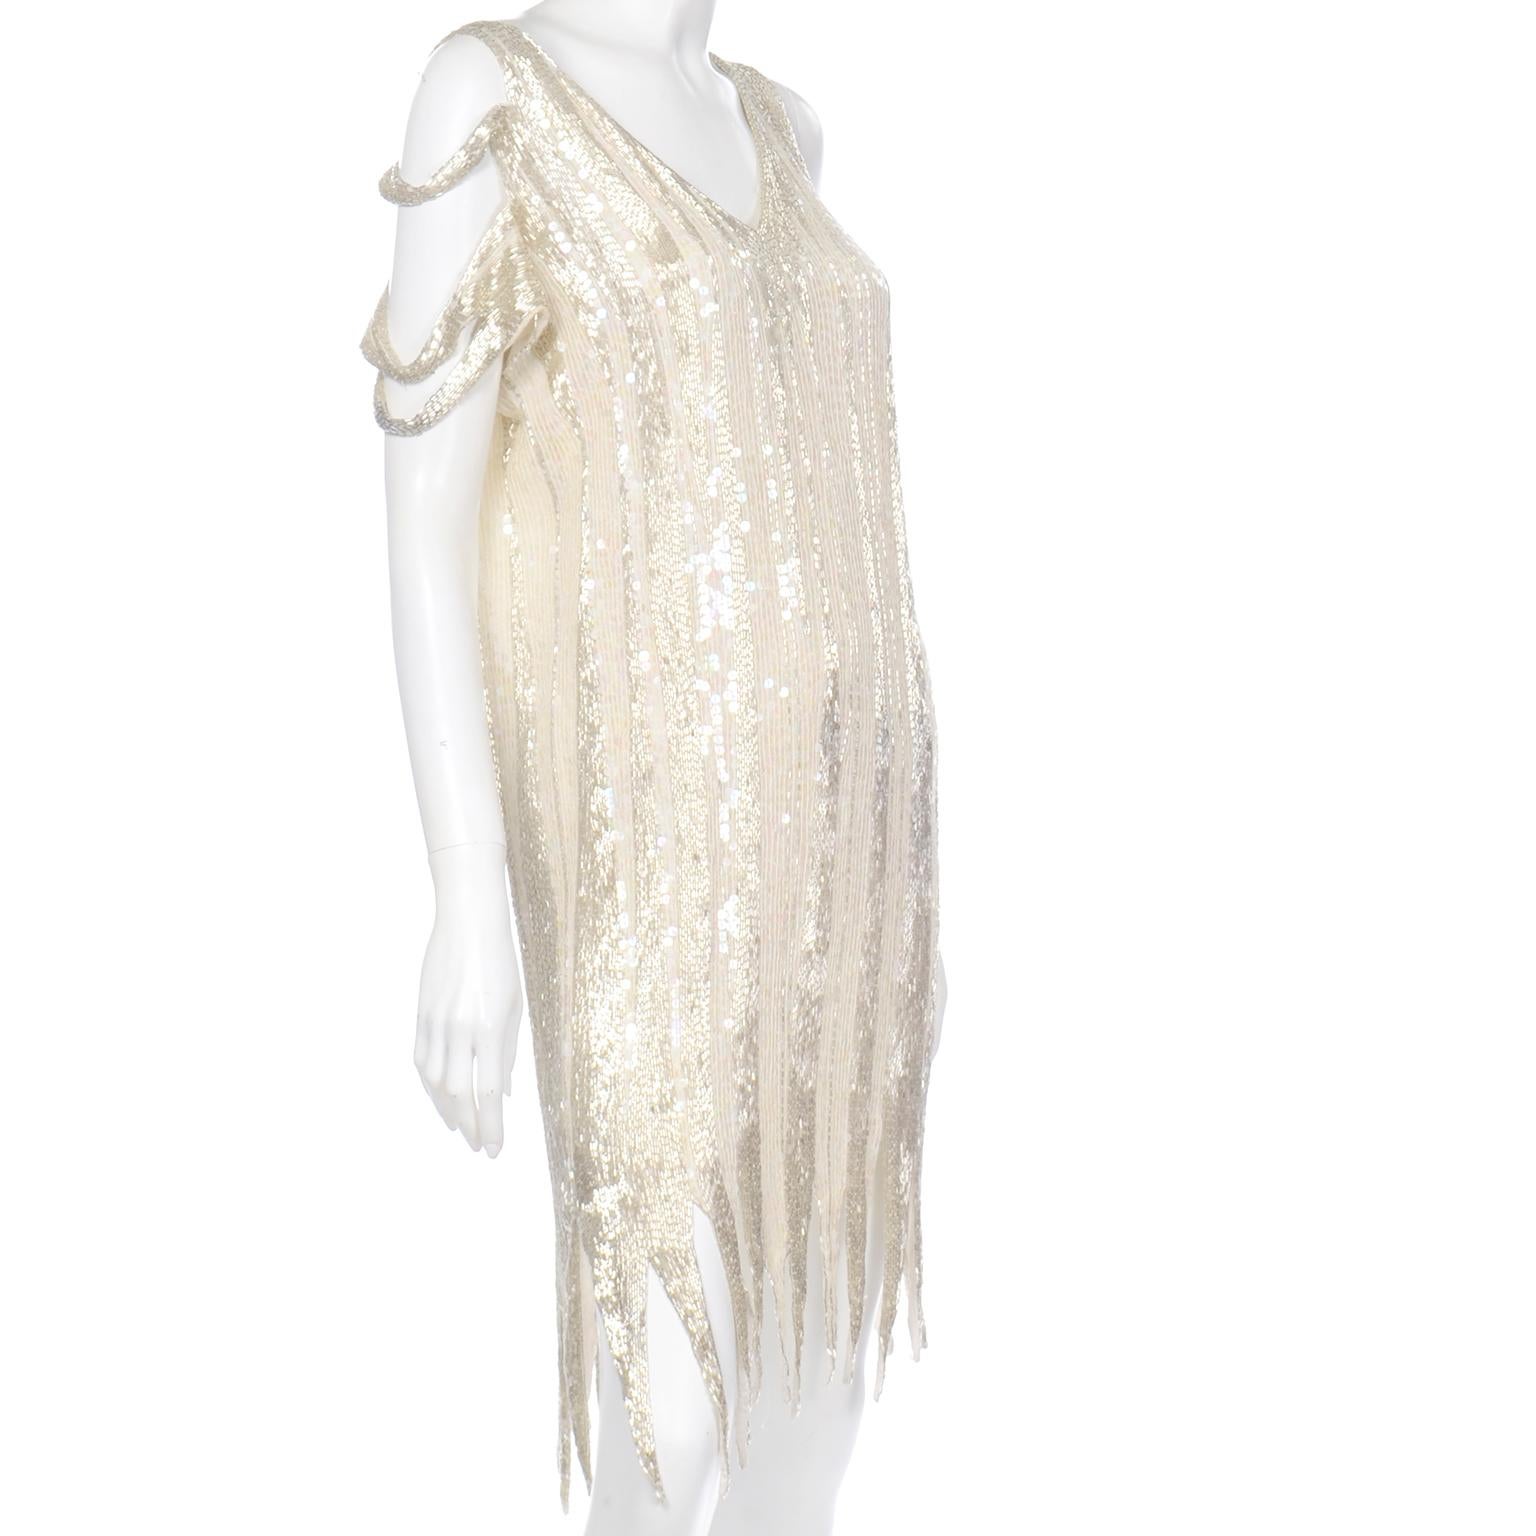 Beige 20s Inspired White & Silver Beaded Flapper Style Evening Dress w Beads & Sequins